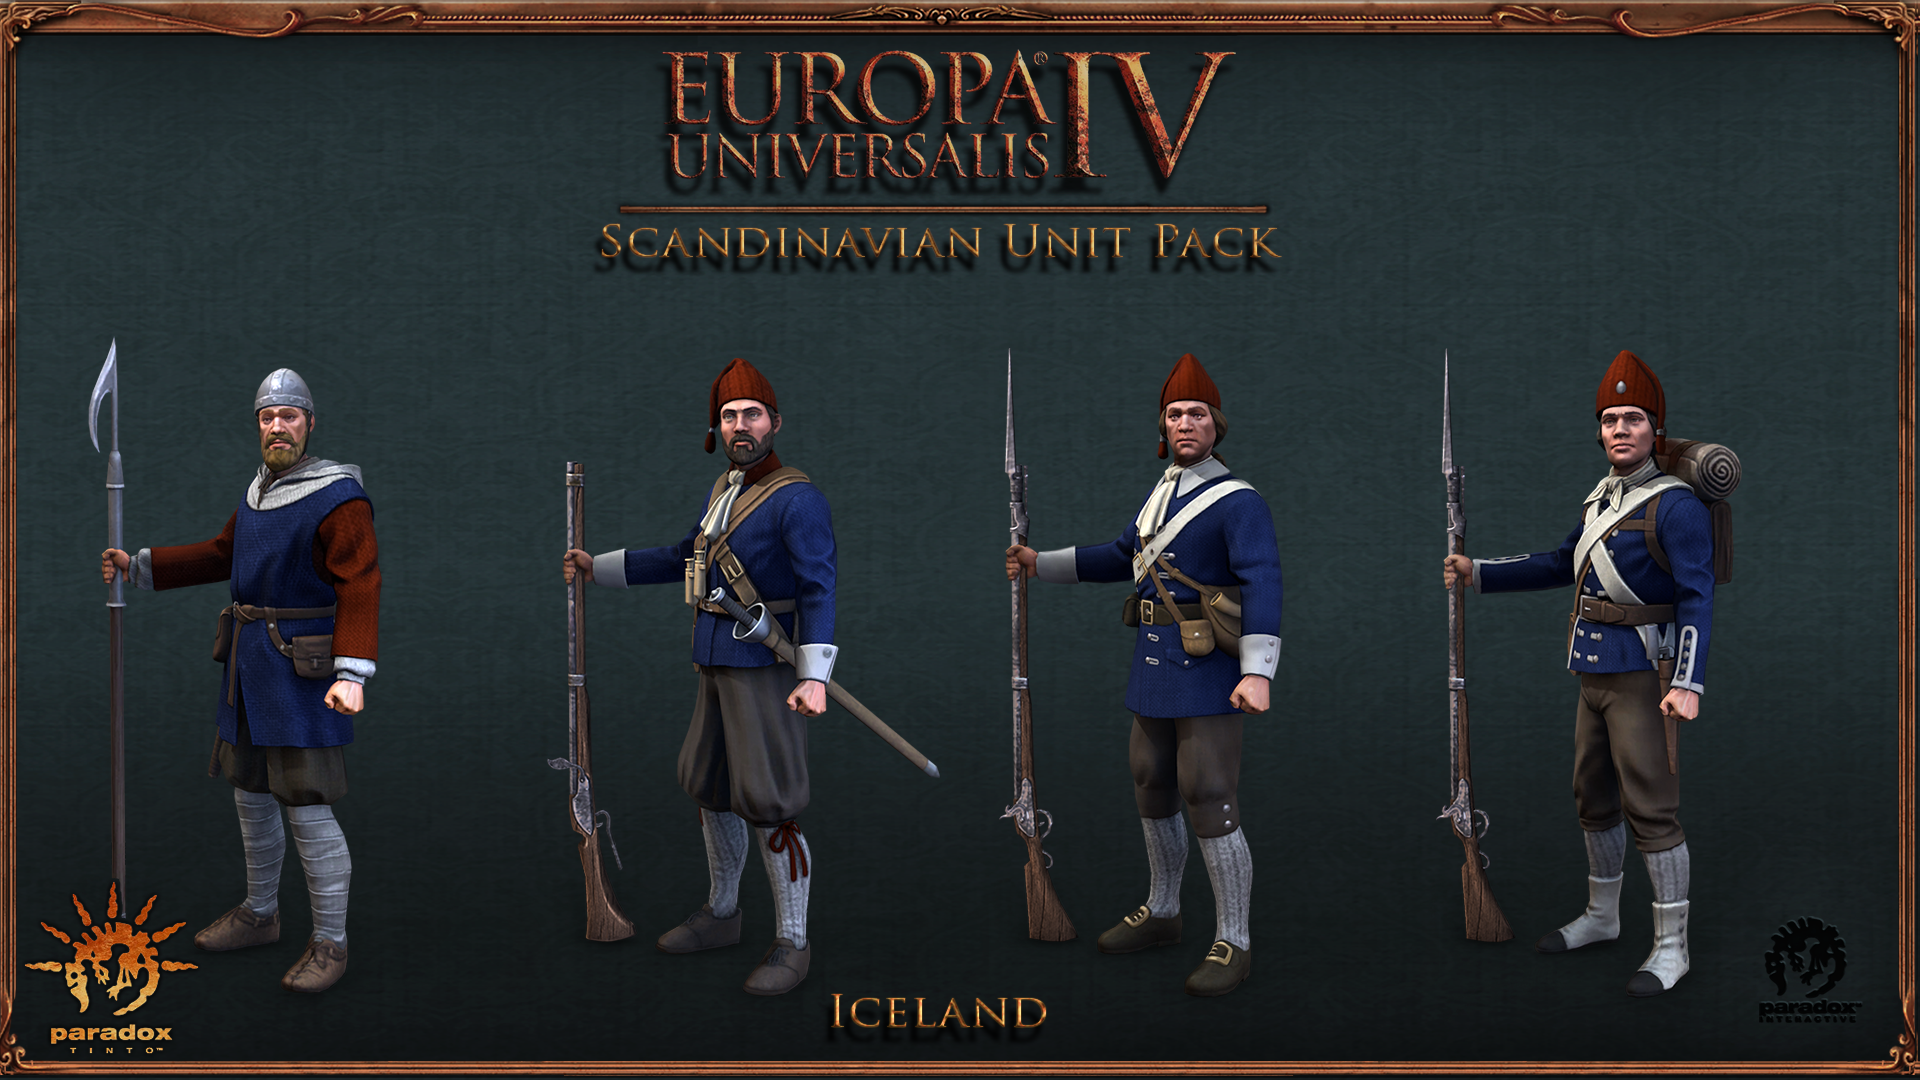 Livonian Order missions - Europa Universalis 4 Wiki